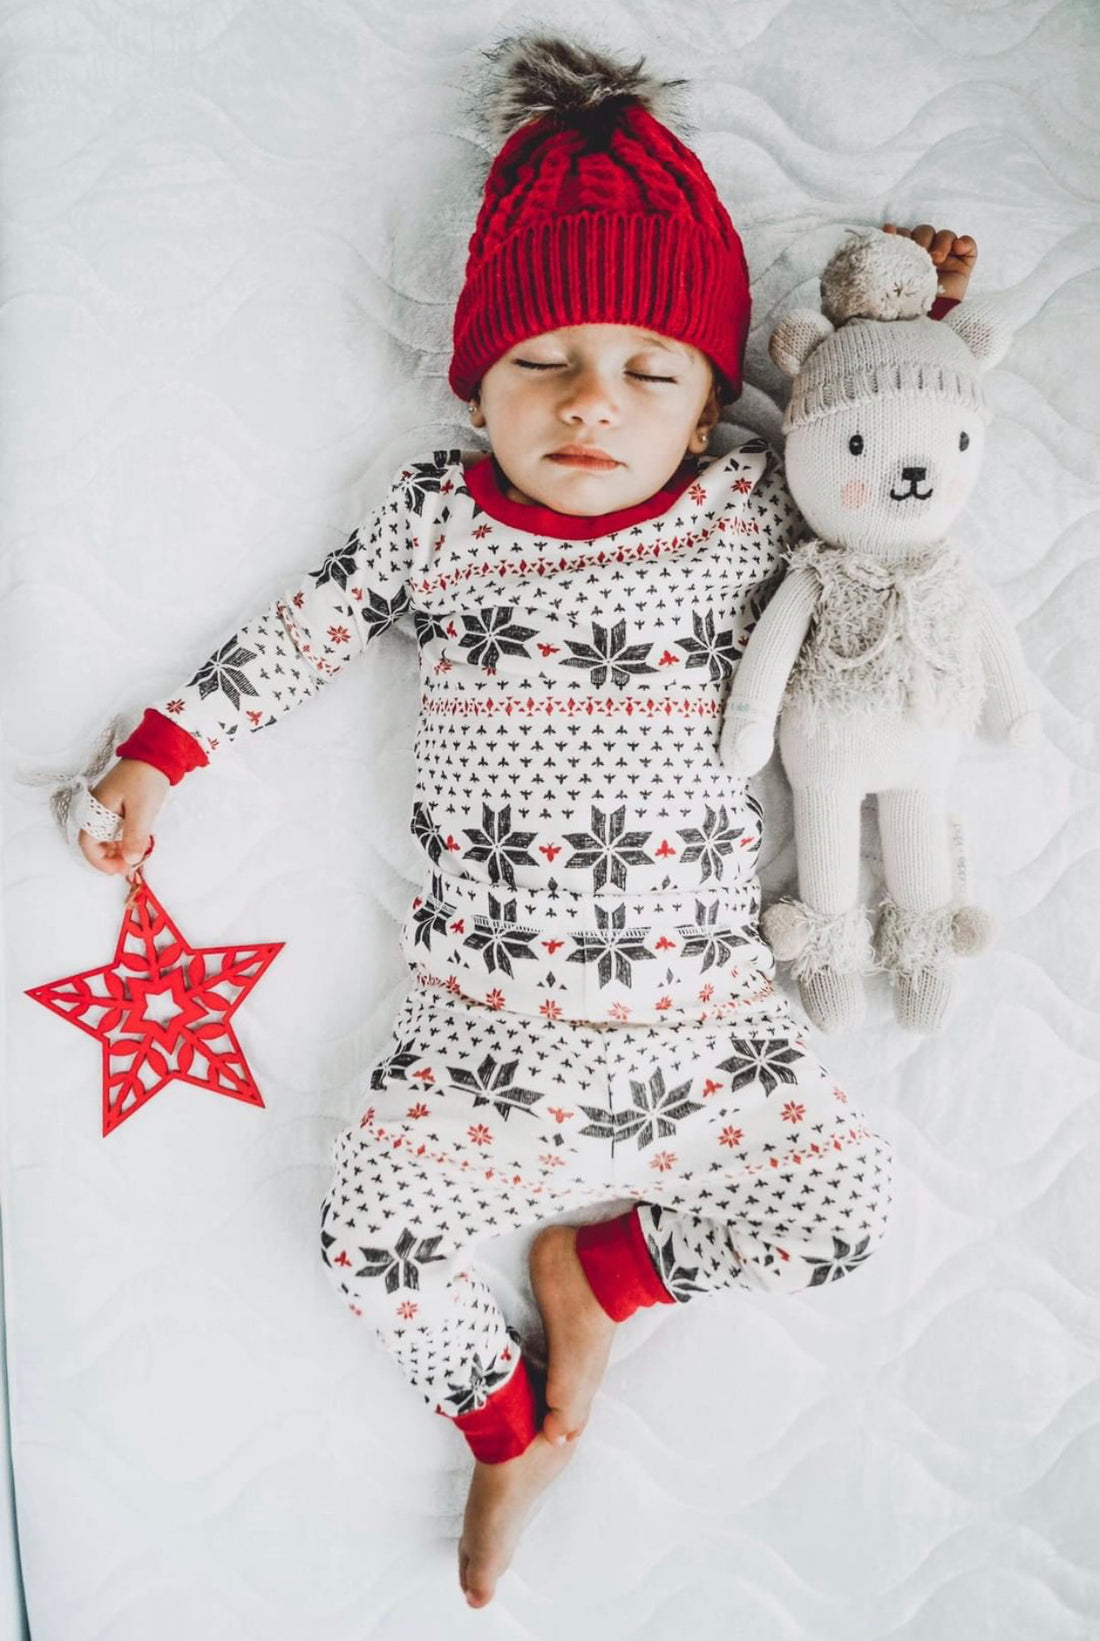 Christmas Jammies for the Littles!